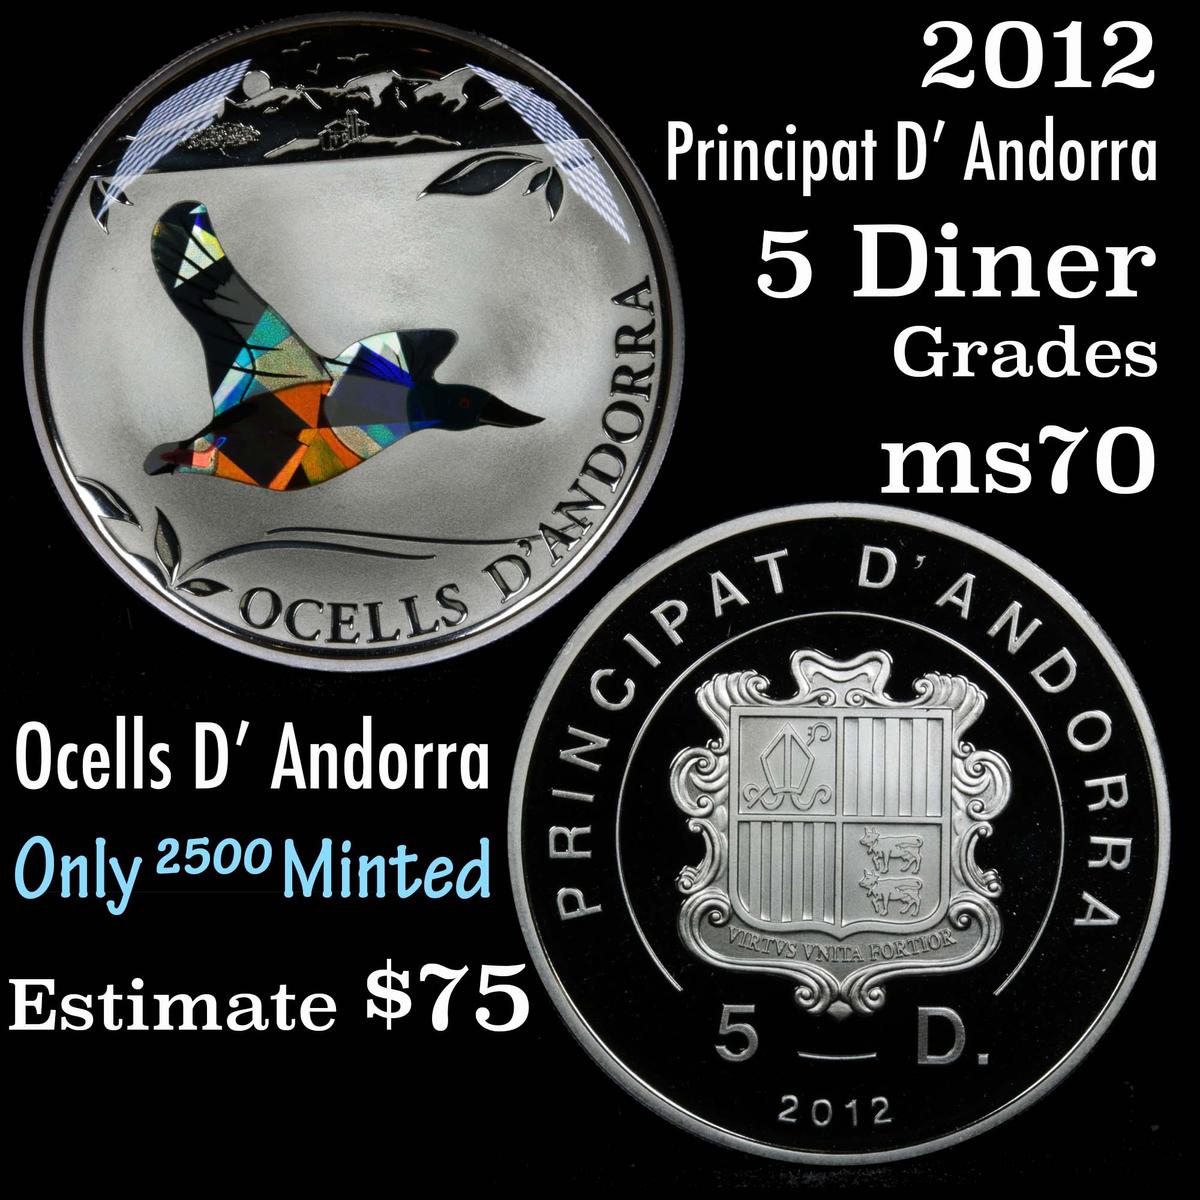 2012 5 DINERS - OCELLS D'ANDORRA - NORTHERN SHOVELER - SILVER COIN Diners 5 Grades ms70, Perfection